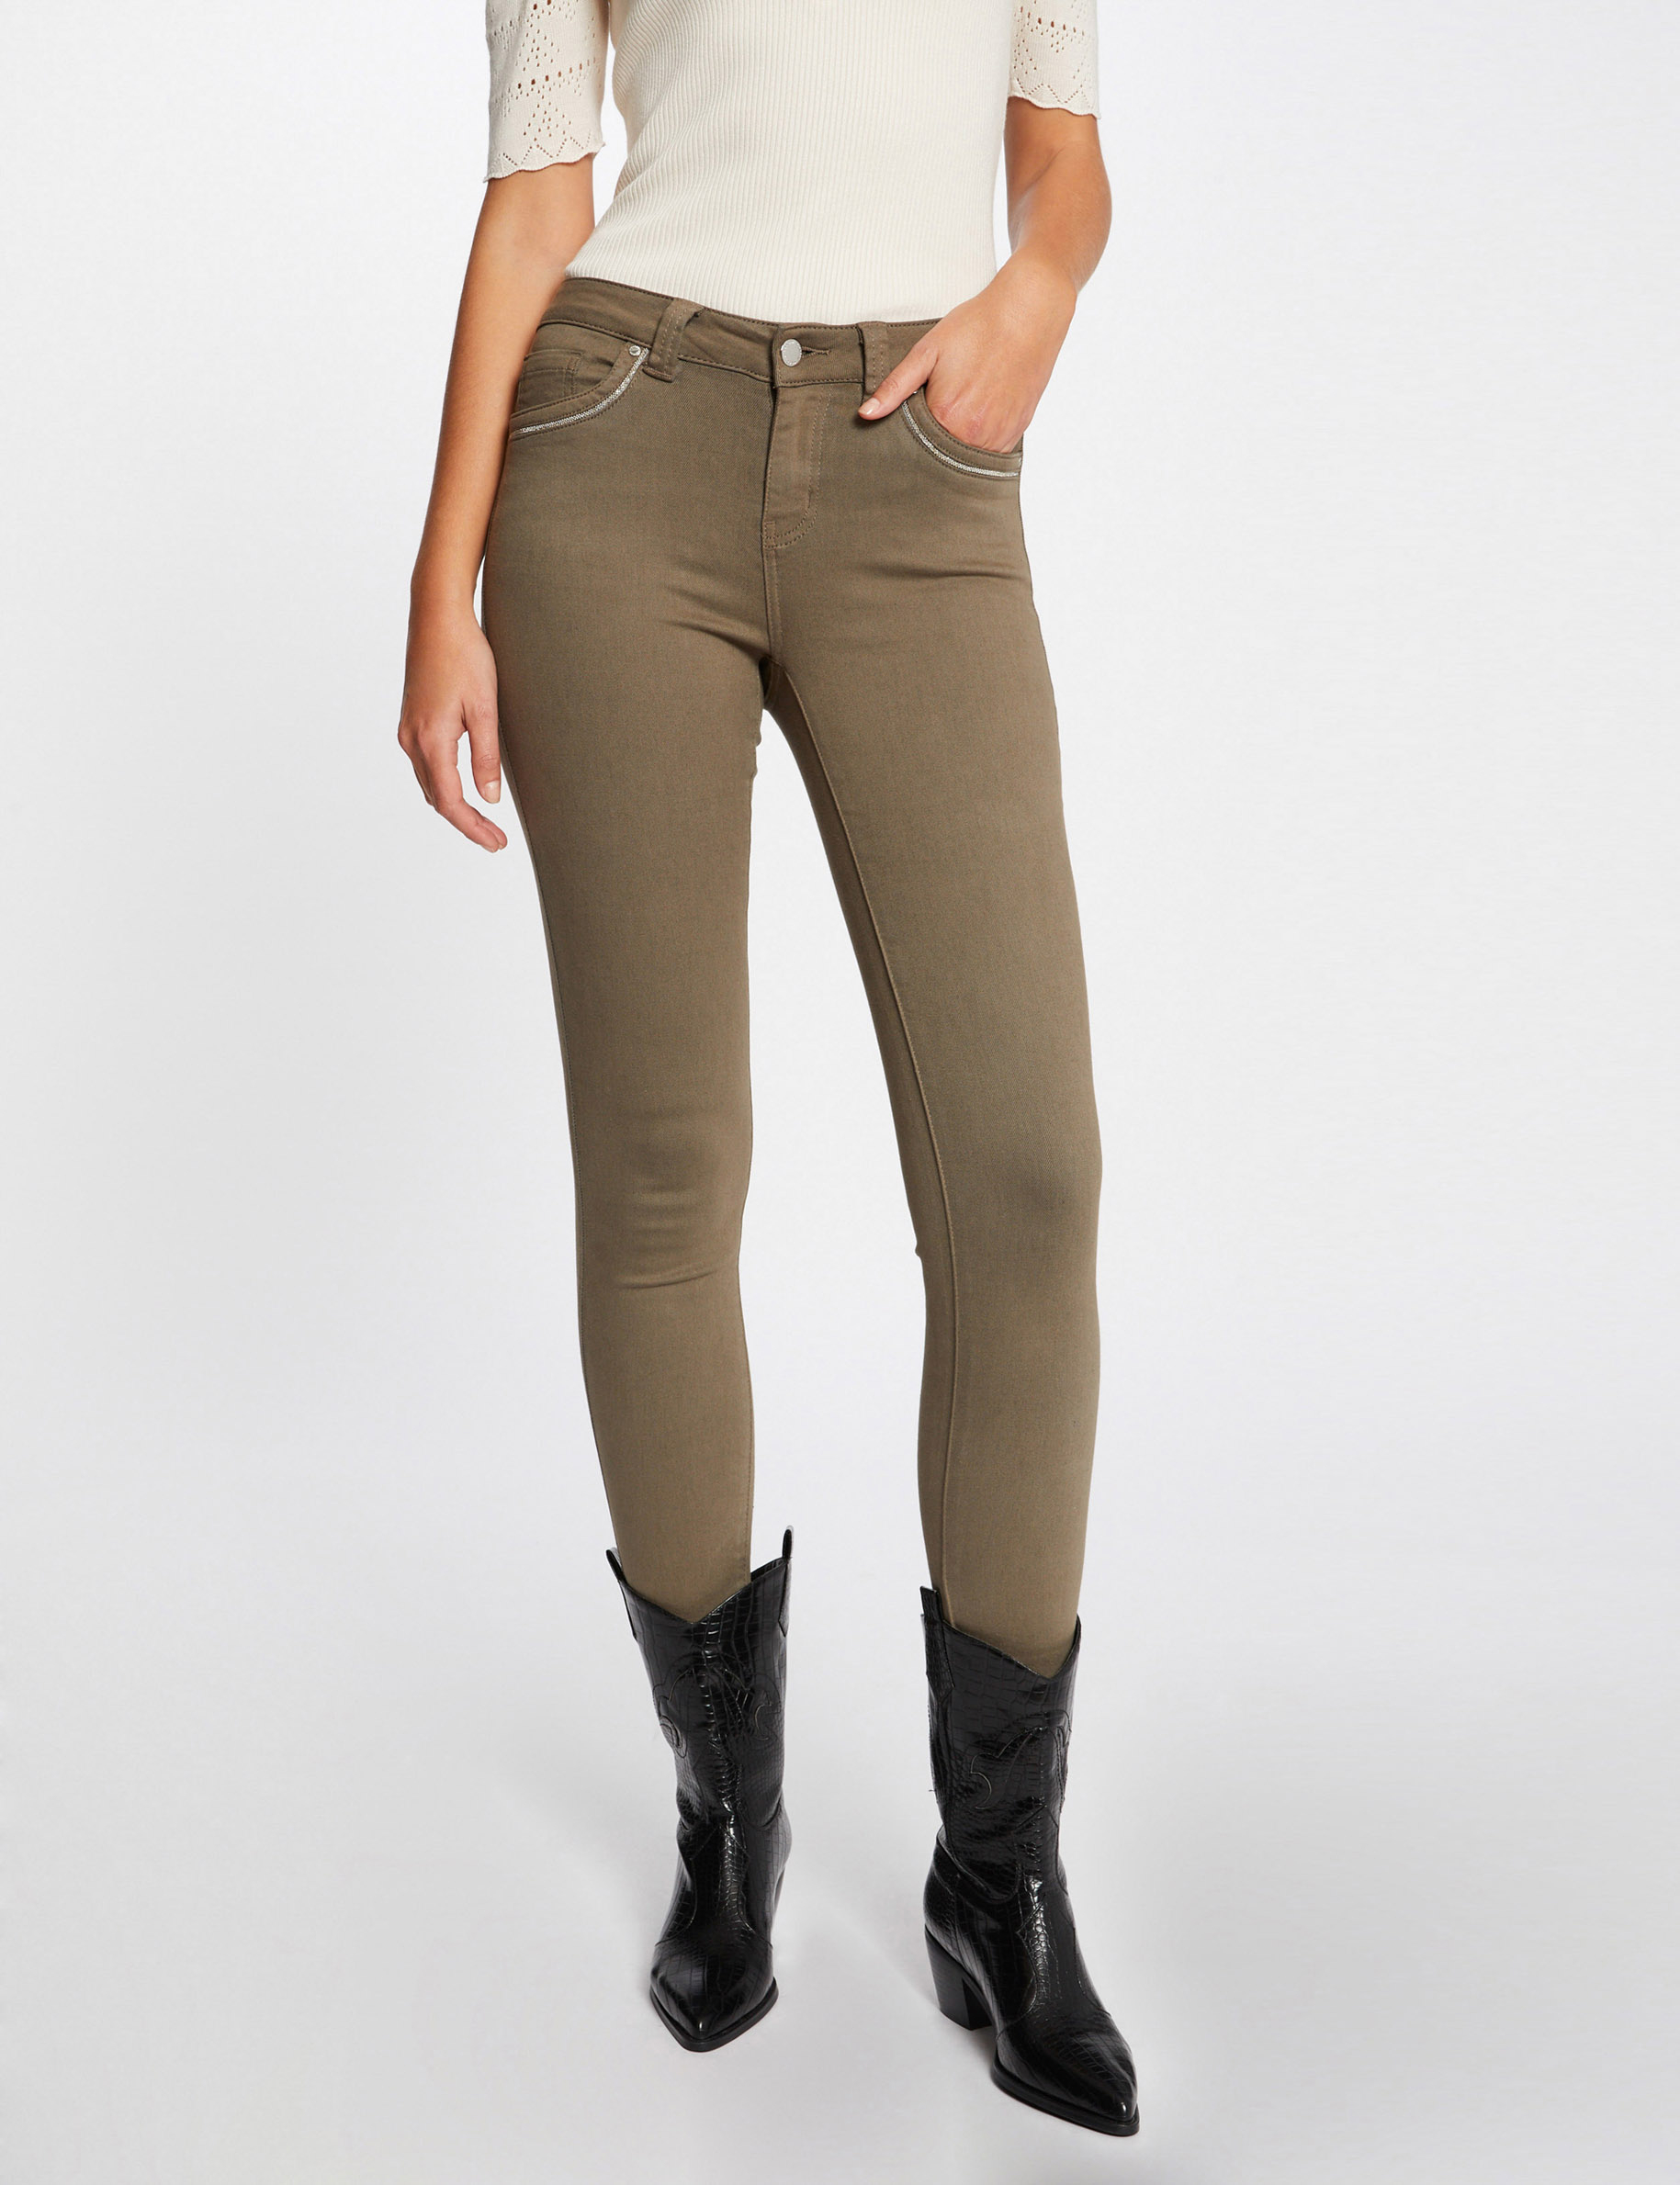 Harkila Trail Ladies Trousers | Great British Outfitters